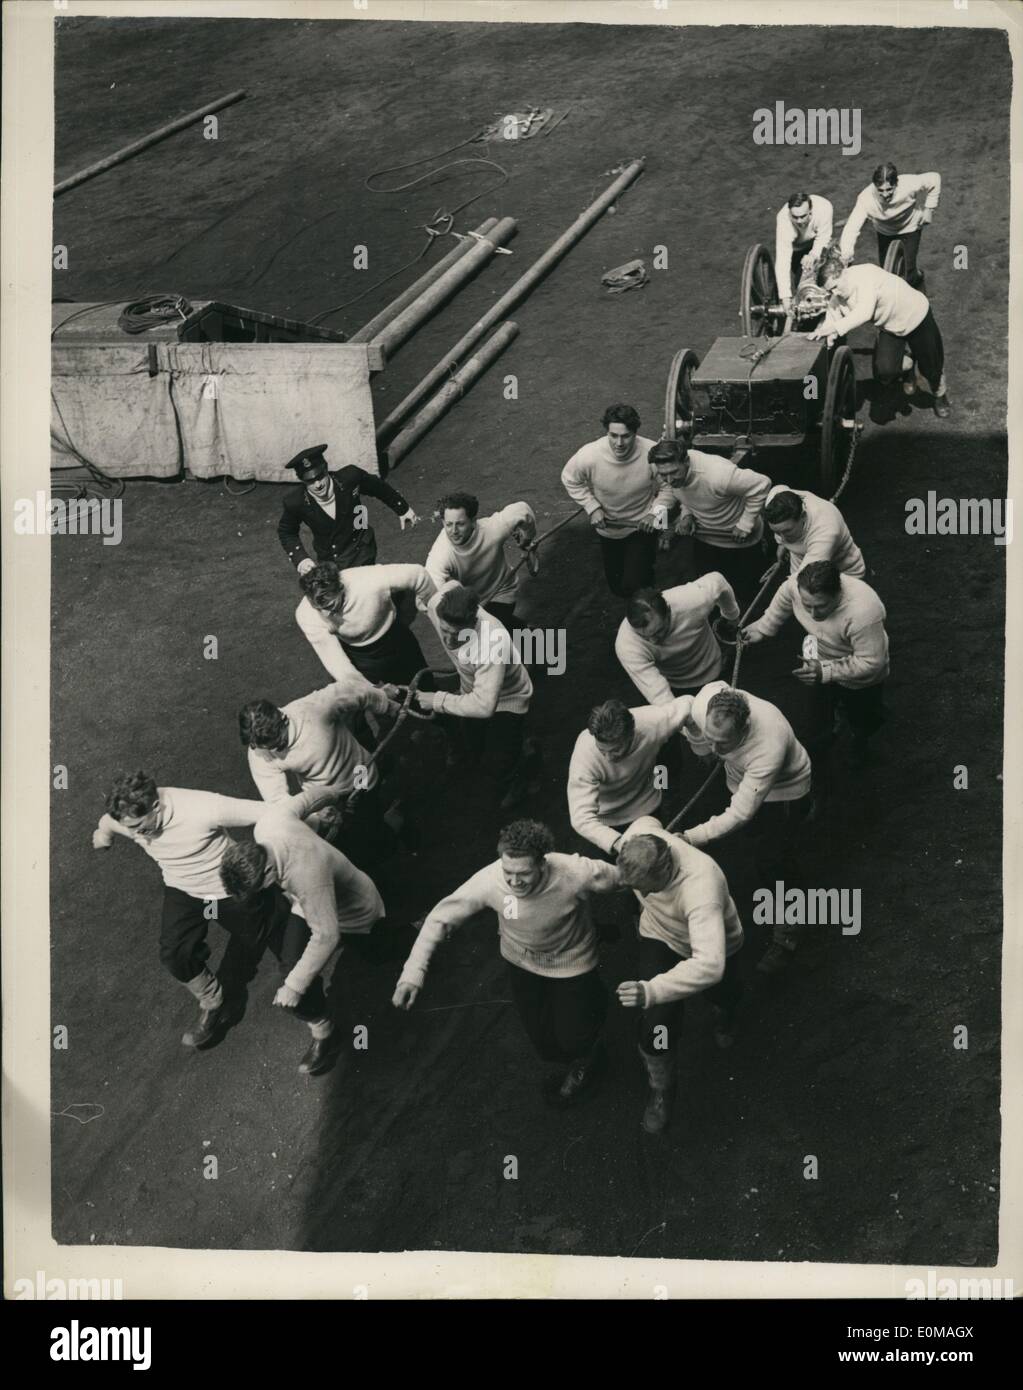 Apr. 04, 1954 - The Nore command Gunners prepare for the Royal Tournament : Men of the Nore Command are in training at the Royal Naval Barracks, Chatham, for the Field Gun Competition of the Royal Tournament. Photo shows Looking down on one of the Gun Crews hauling the completed gun and equipment during their training at Chatham. Stock Photo